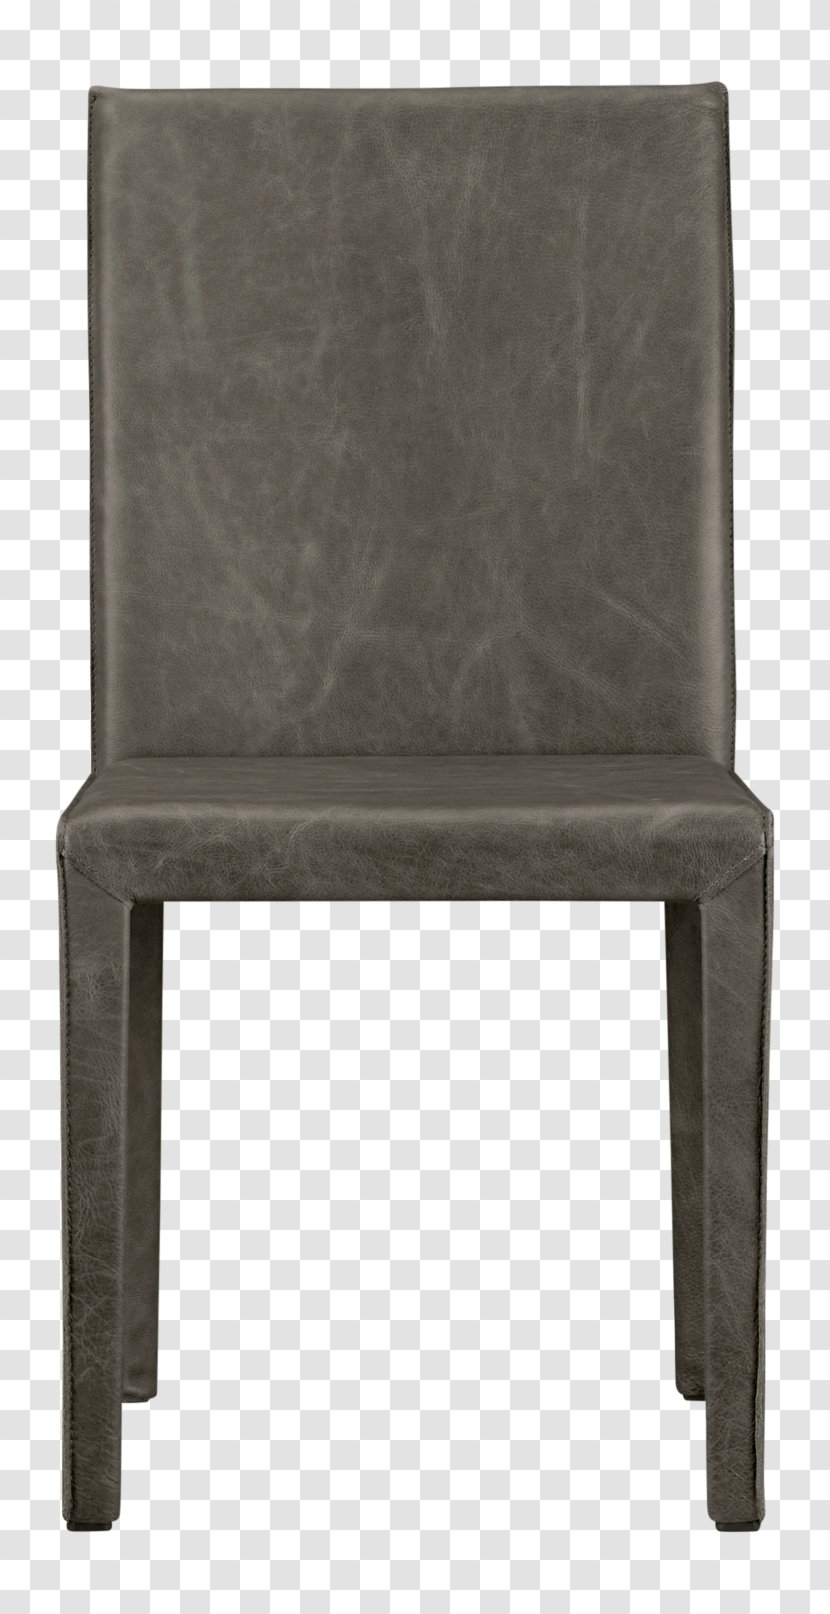 Table Chair Interior Design Services Dining Room - Houzz Marble Pillars Transparent PNG